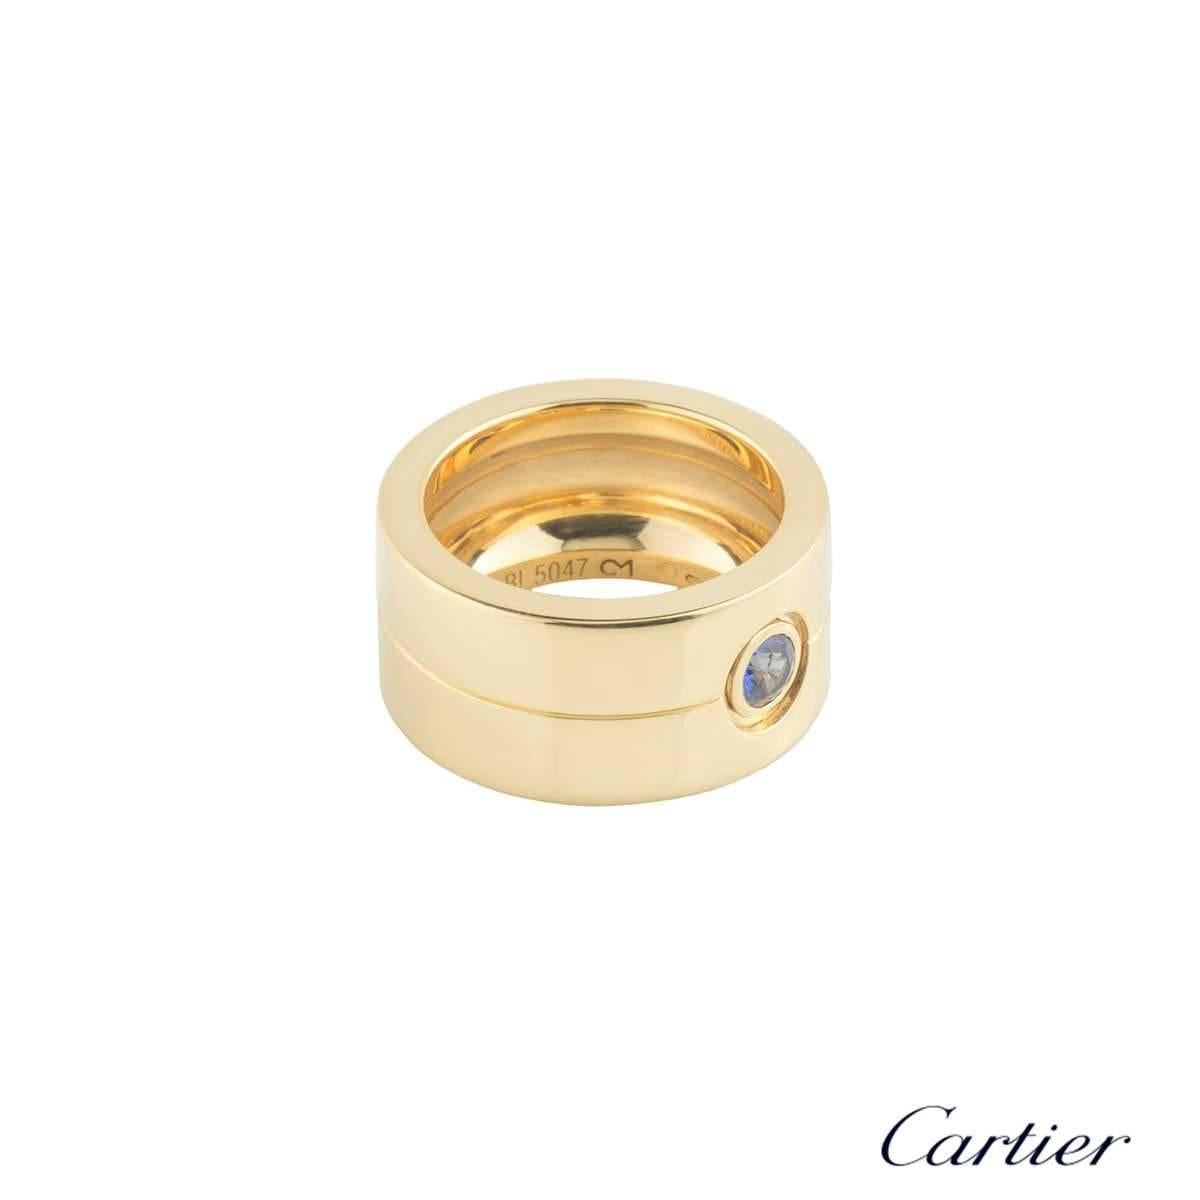 An 18k yellow gold and sapphire Cartier dress ring. The ring comprises of a round brilliant cut sapphire in a rubover setting weighing 0.25ct, with a blue hue throughout. The ring is a US size 6 3/4, EU size 54 and UK size N1/2 and measures 10mm in